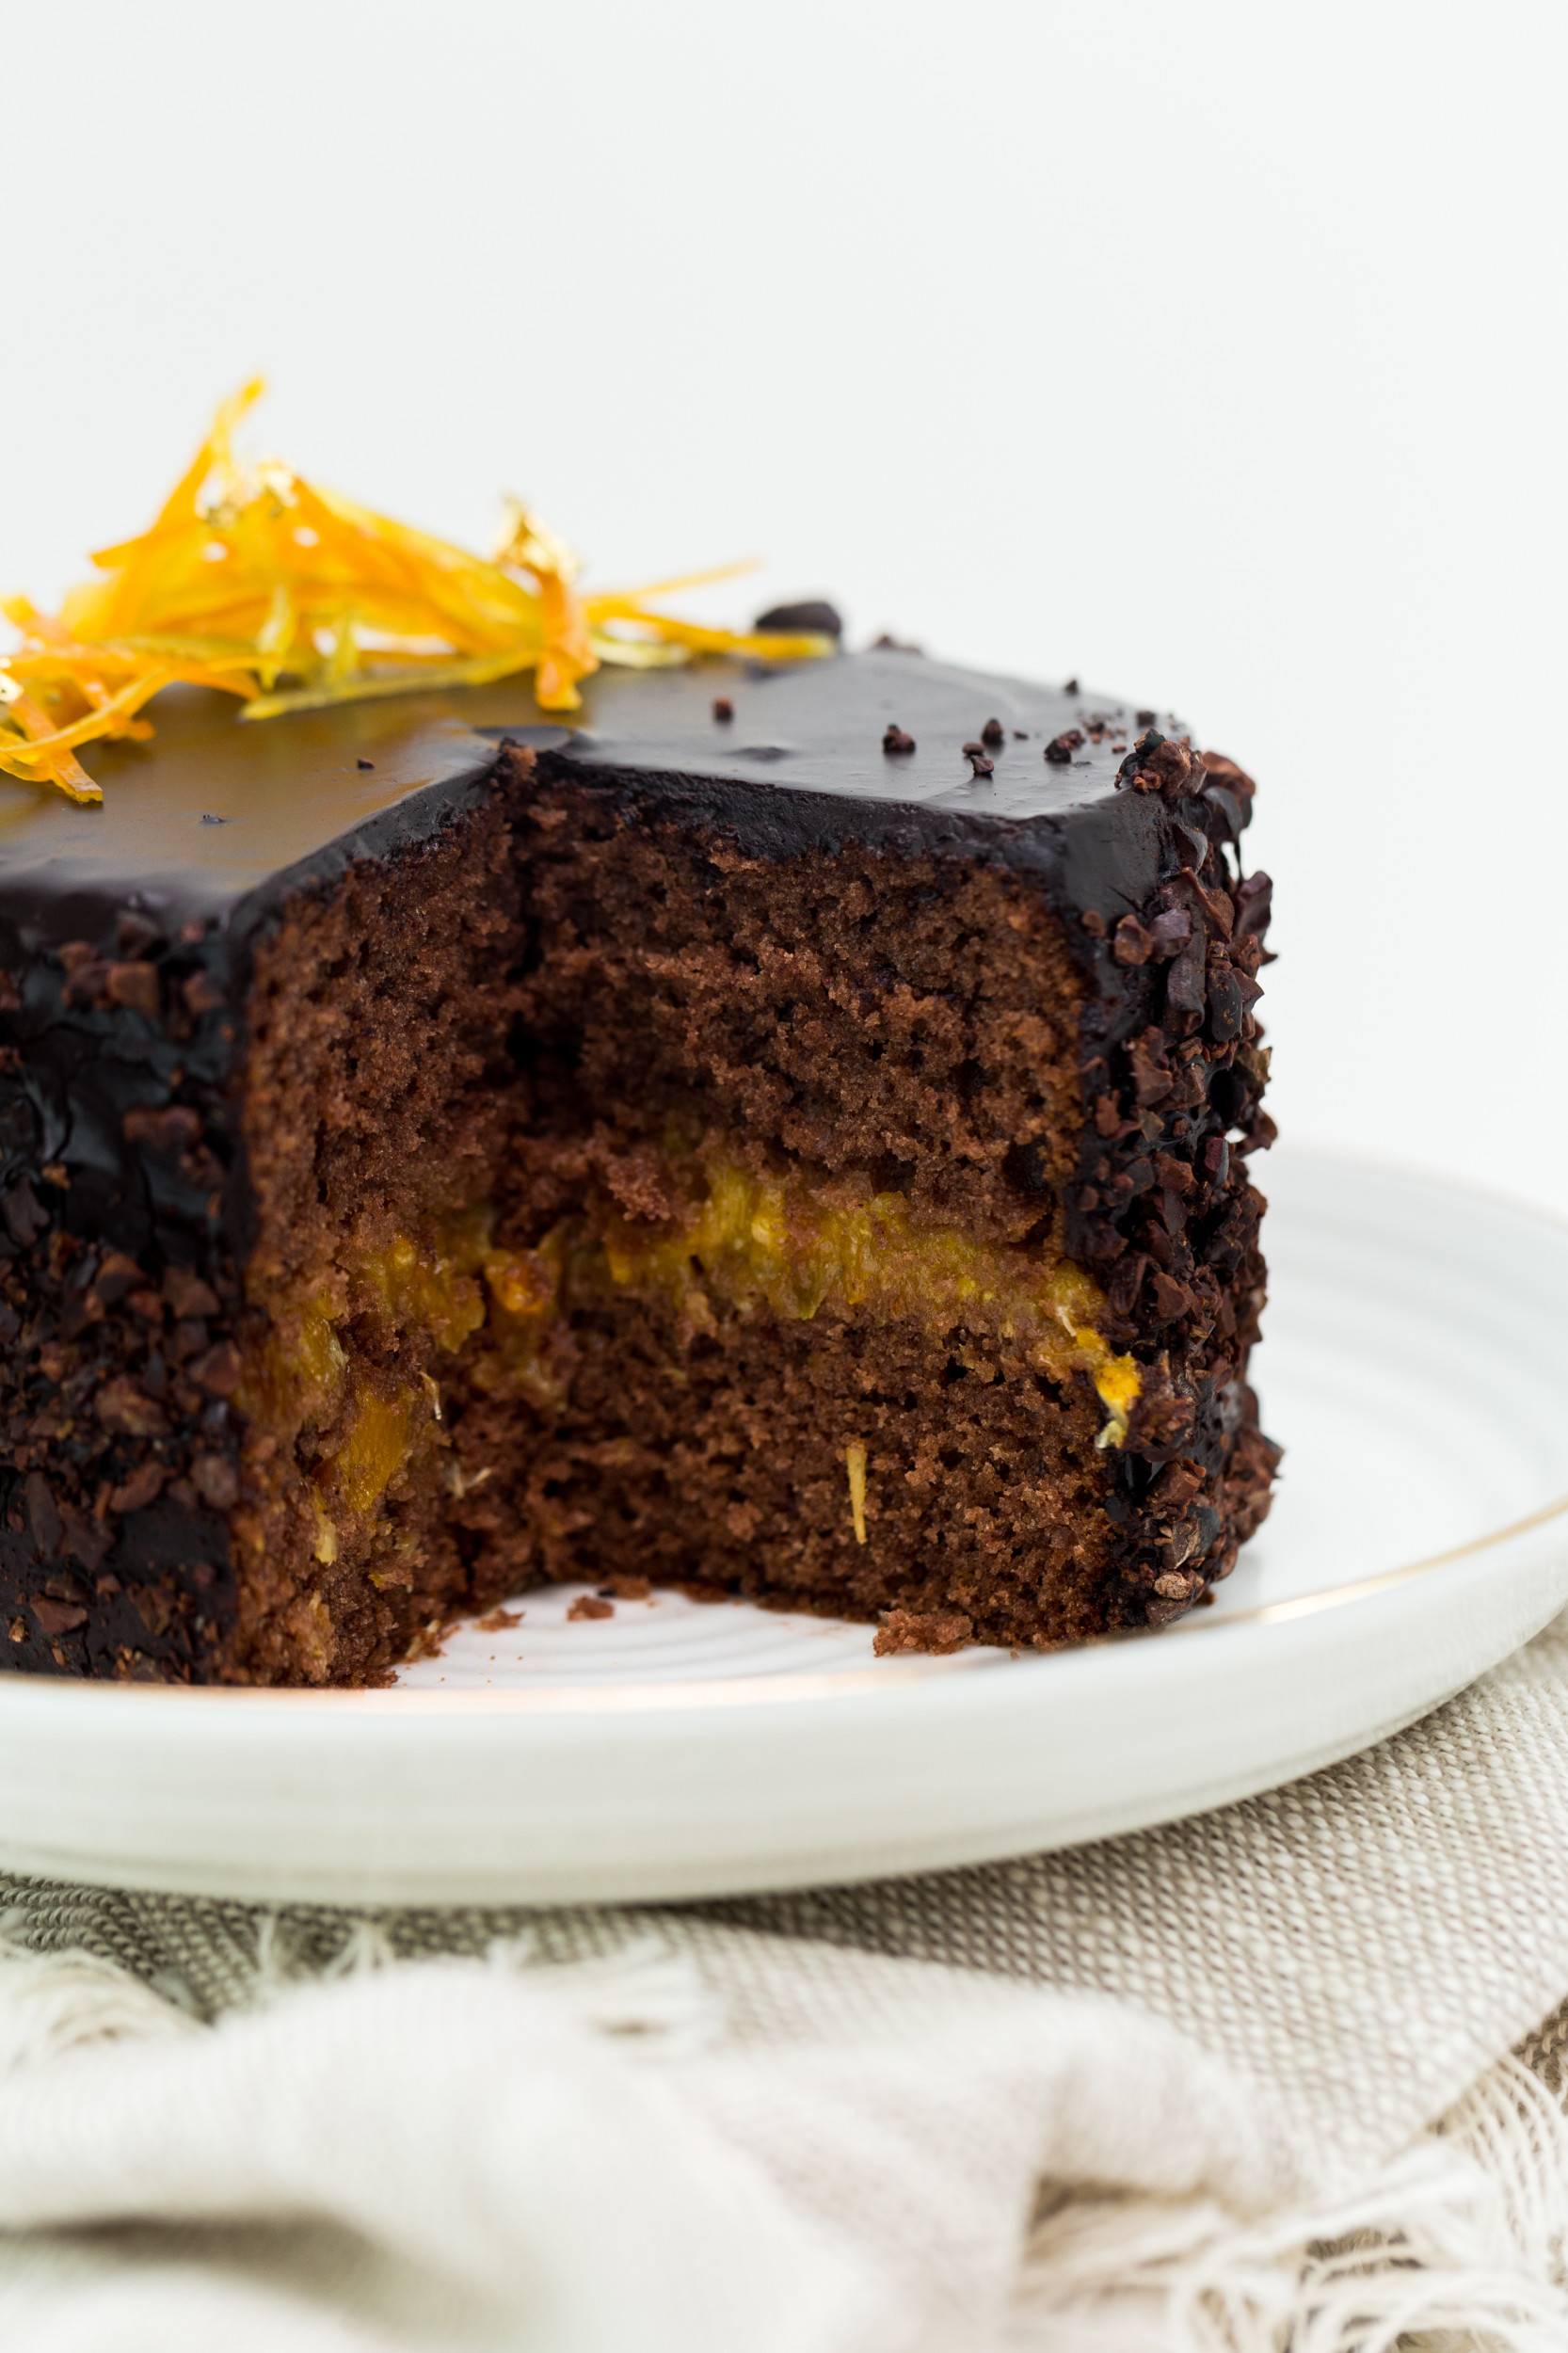 Low-Carb Sacher torte by Greek Goes Keto is here